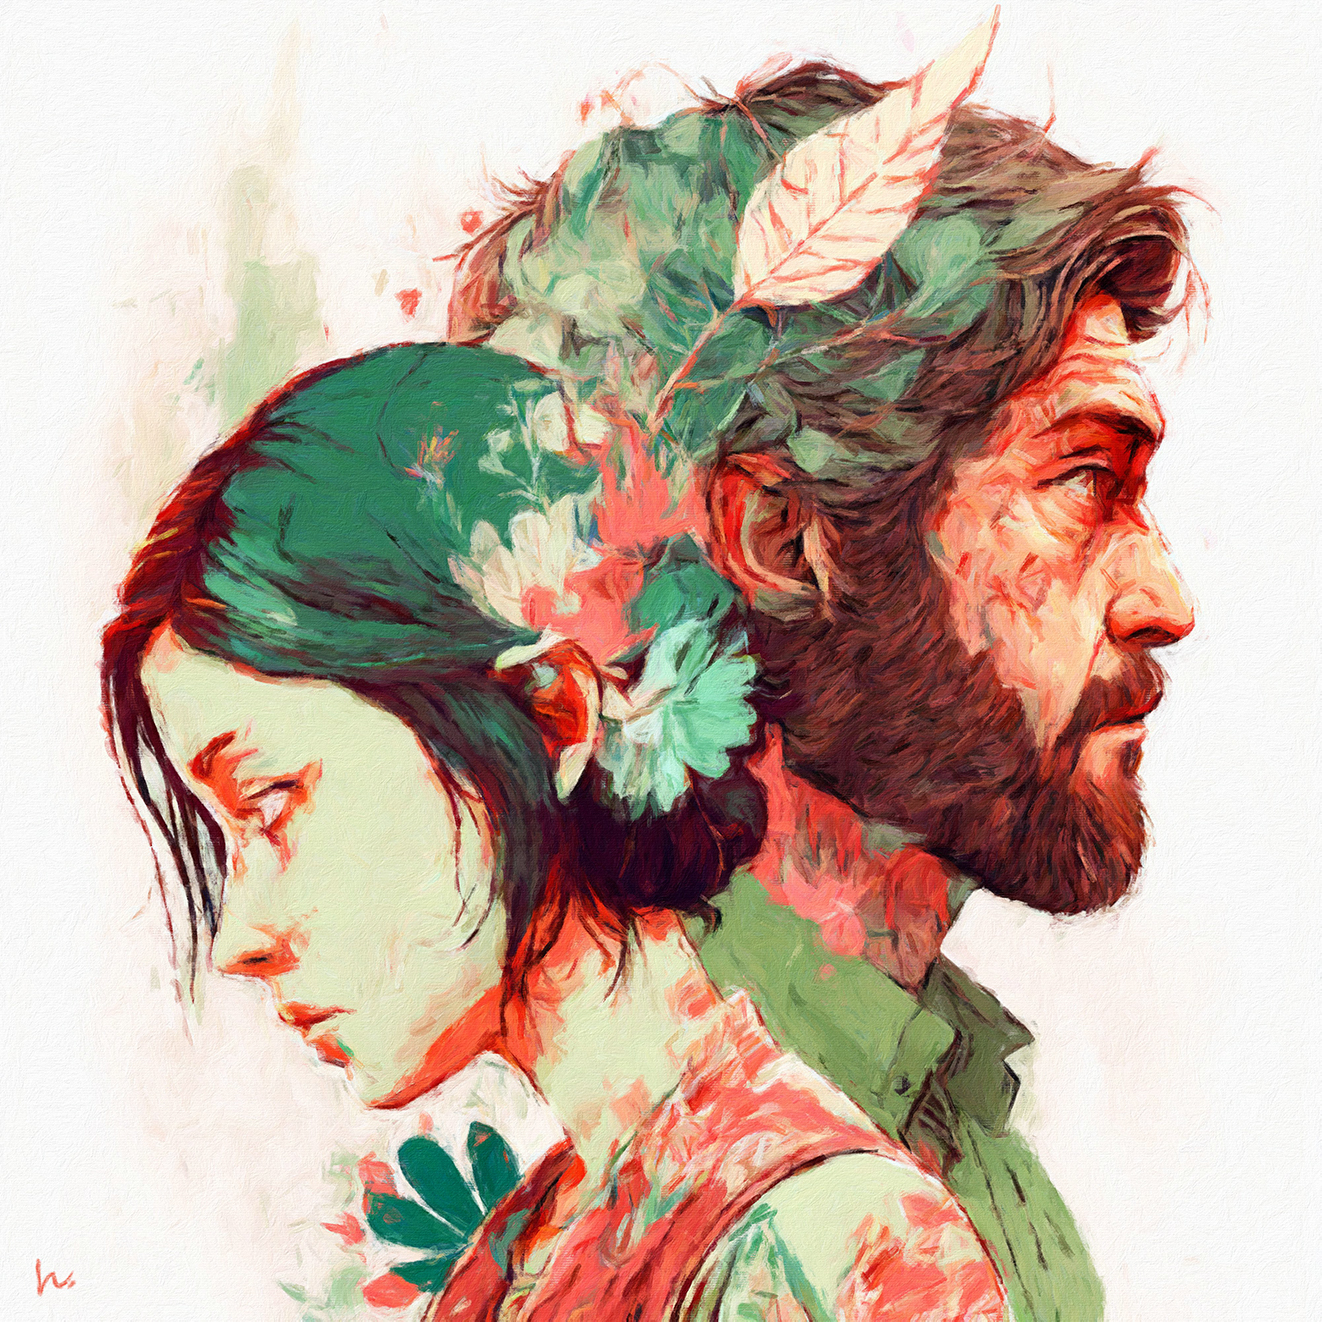 I painted a fanart of my popular sport of all time “Joel and Ellie” from the last of us :)